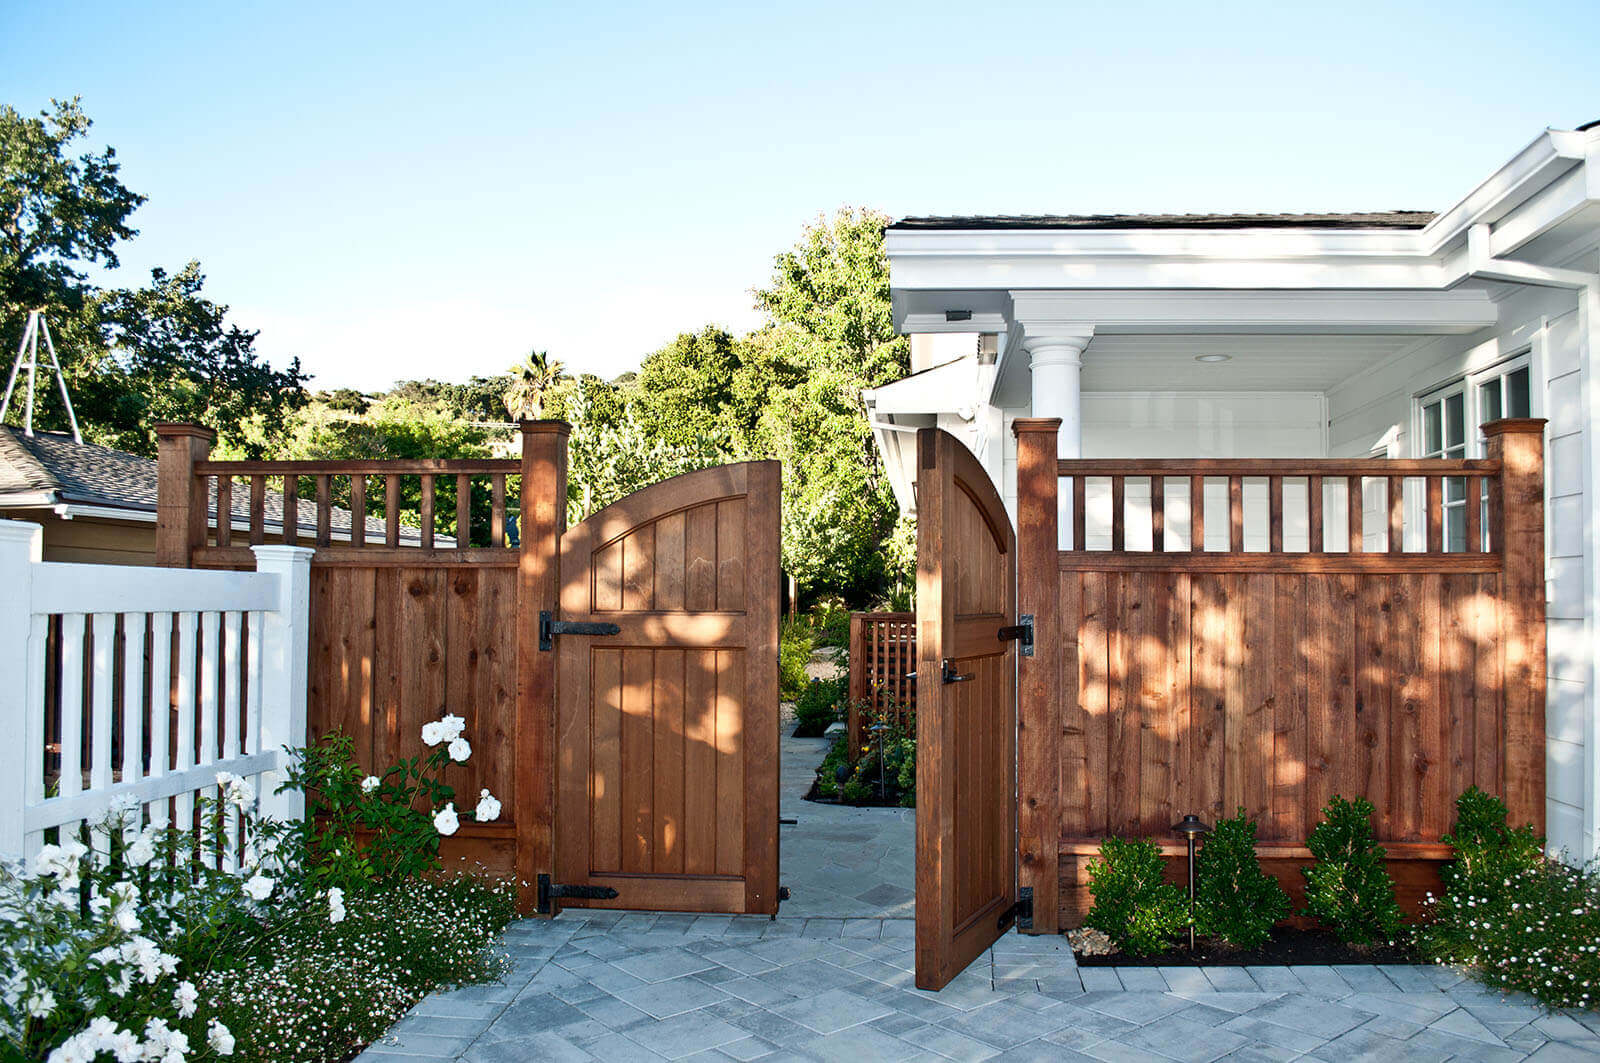 Redwood double gate with white roses opens to back yard